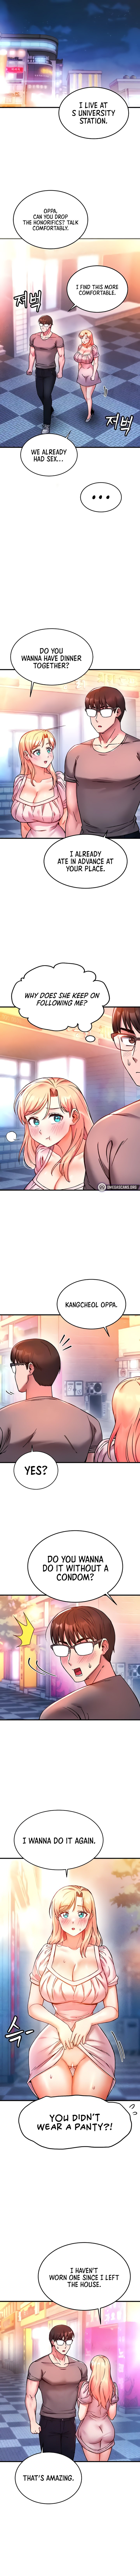 Kangcheol’s Bosses - Chapter 5 Page 8